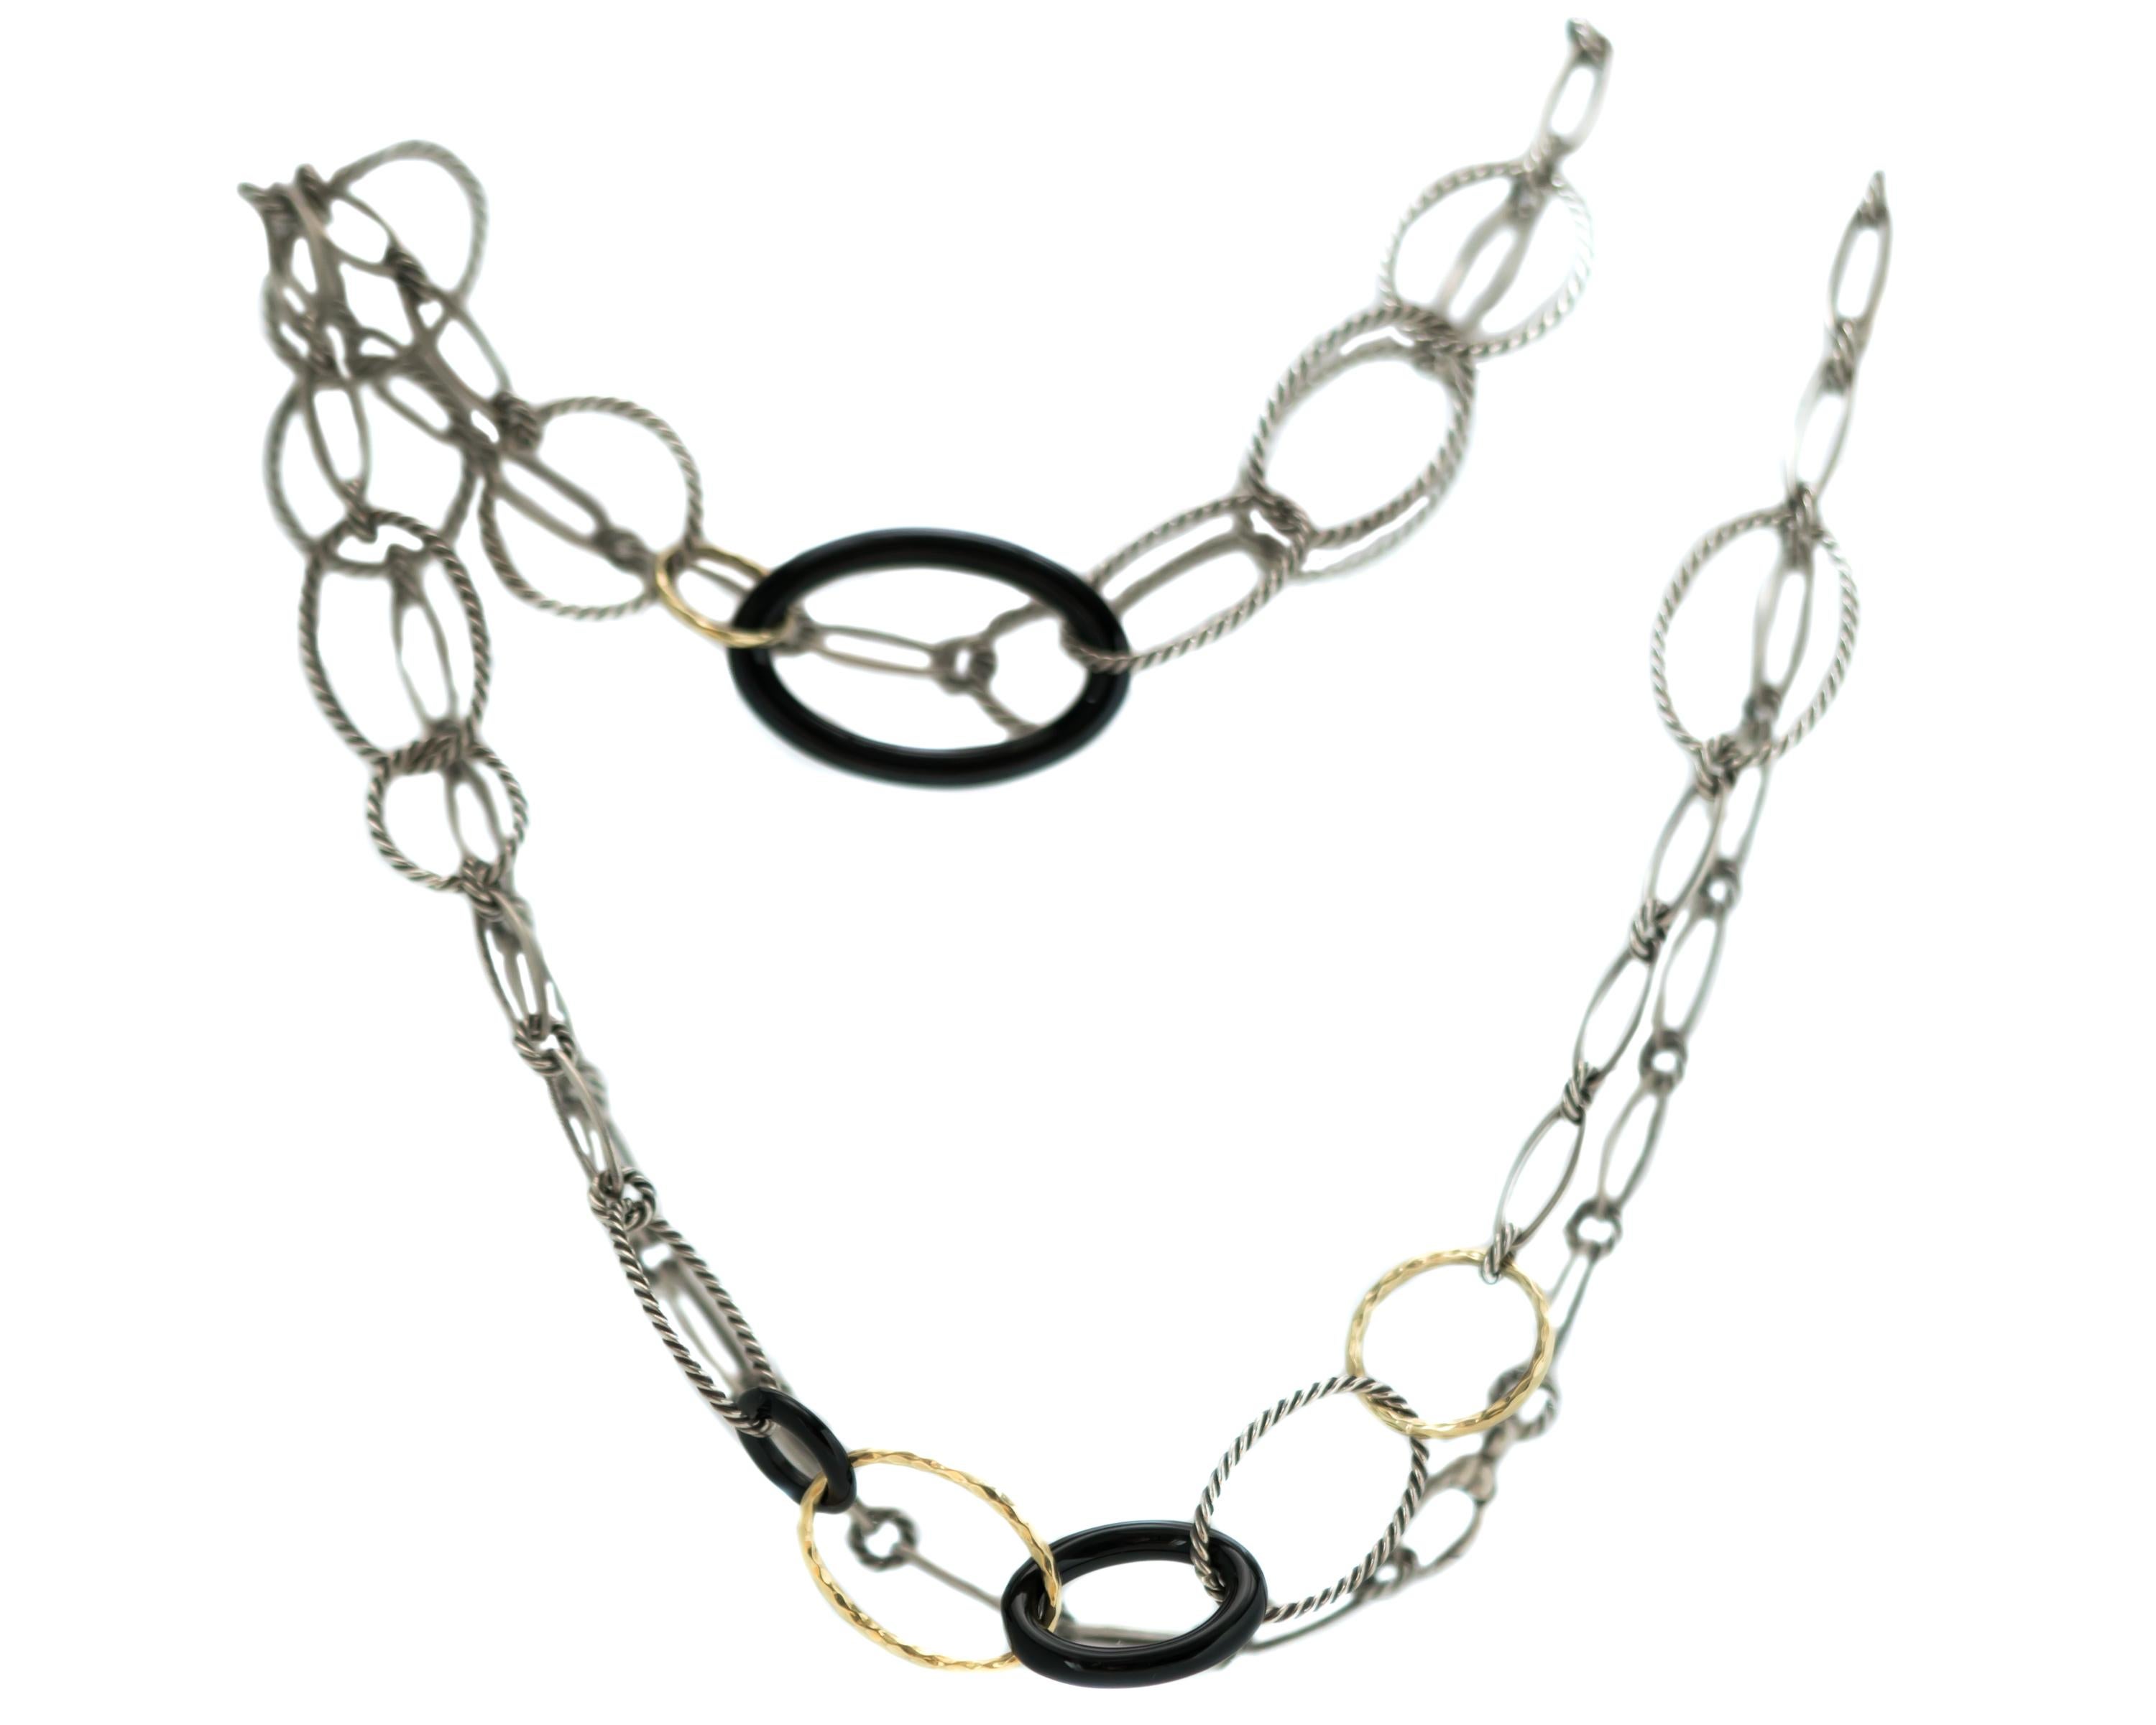 1980s David Yurman Link Necklace - Sterling Silver, 18 Karat Yellow Gold, Onyx

Features:
22 inches long
Round and Oval Links
Sterling Silver Smooth and Cable Links
18 Karat Yellow Gold Textured Links
Onyx Smooth Links
Can be worn as a long, single